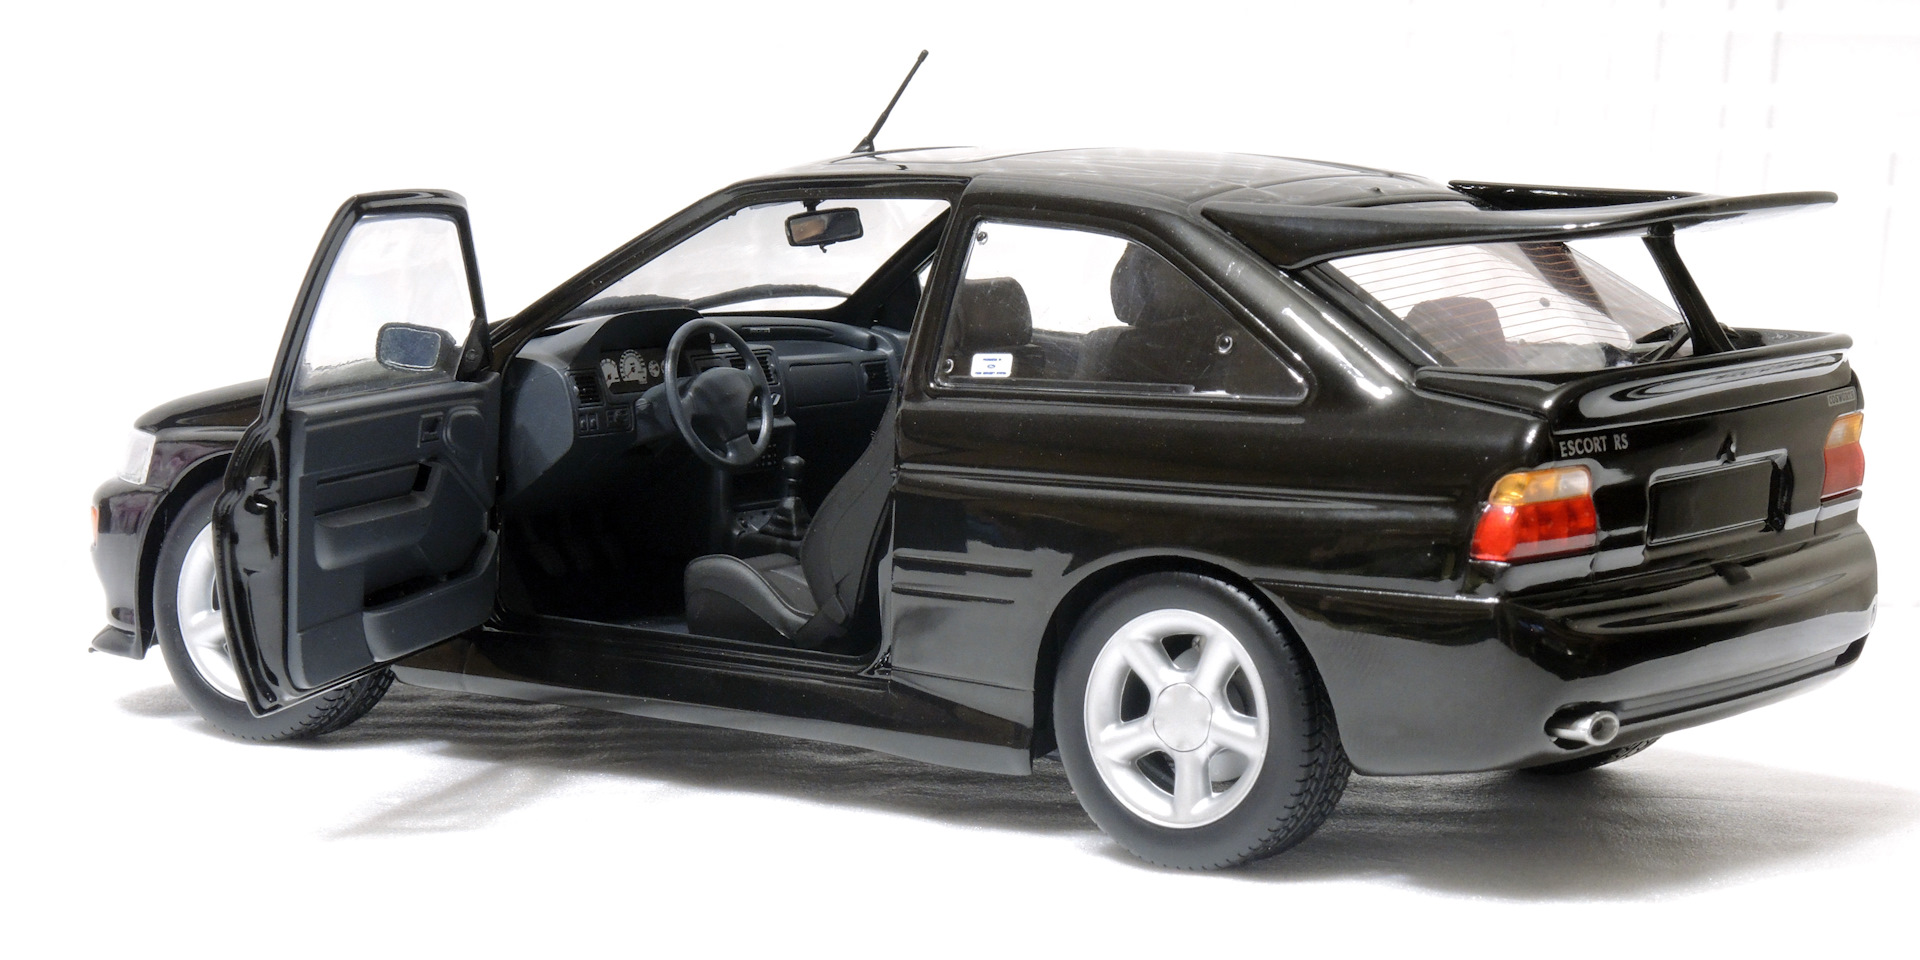 Ford escort rs cosworth and sierra cosworth cars shown